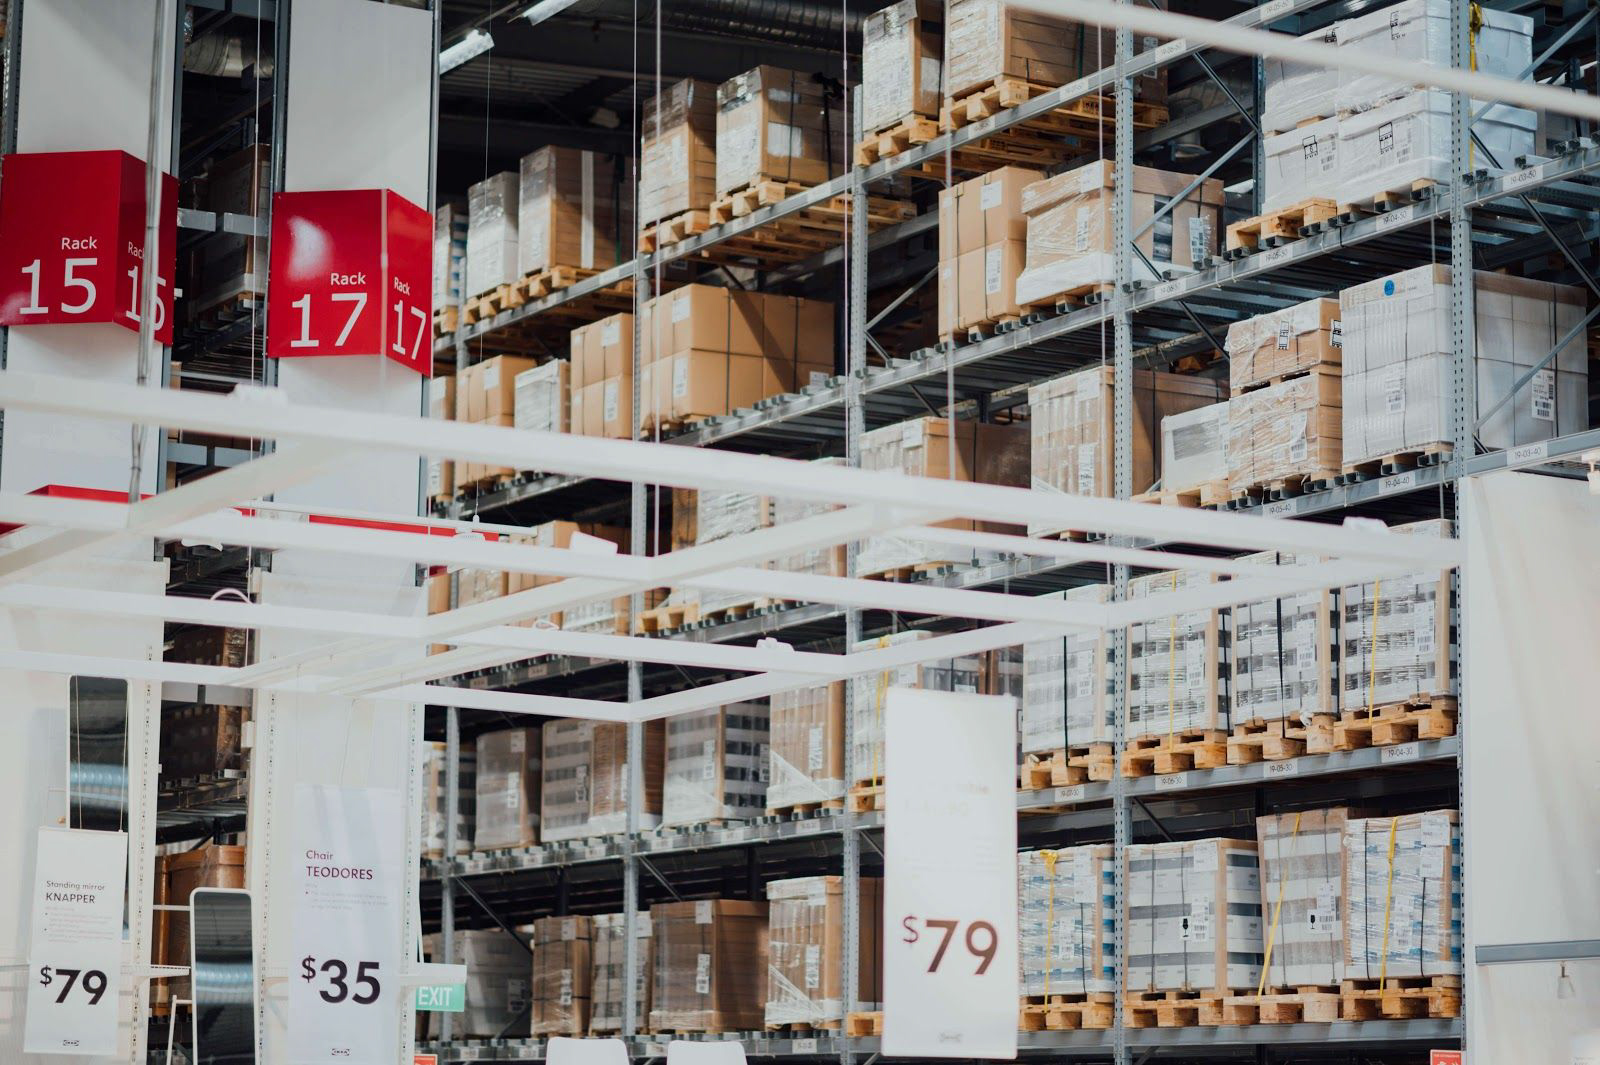 Warehouse Management: Definition, Challenges, and Why it’s Crucial for Business